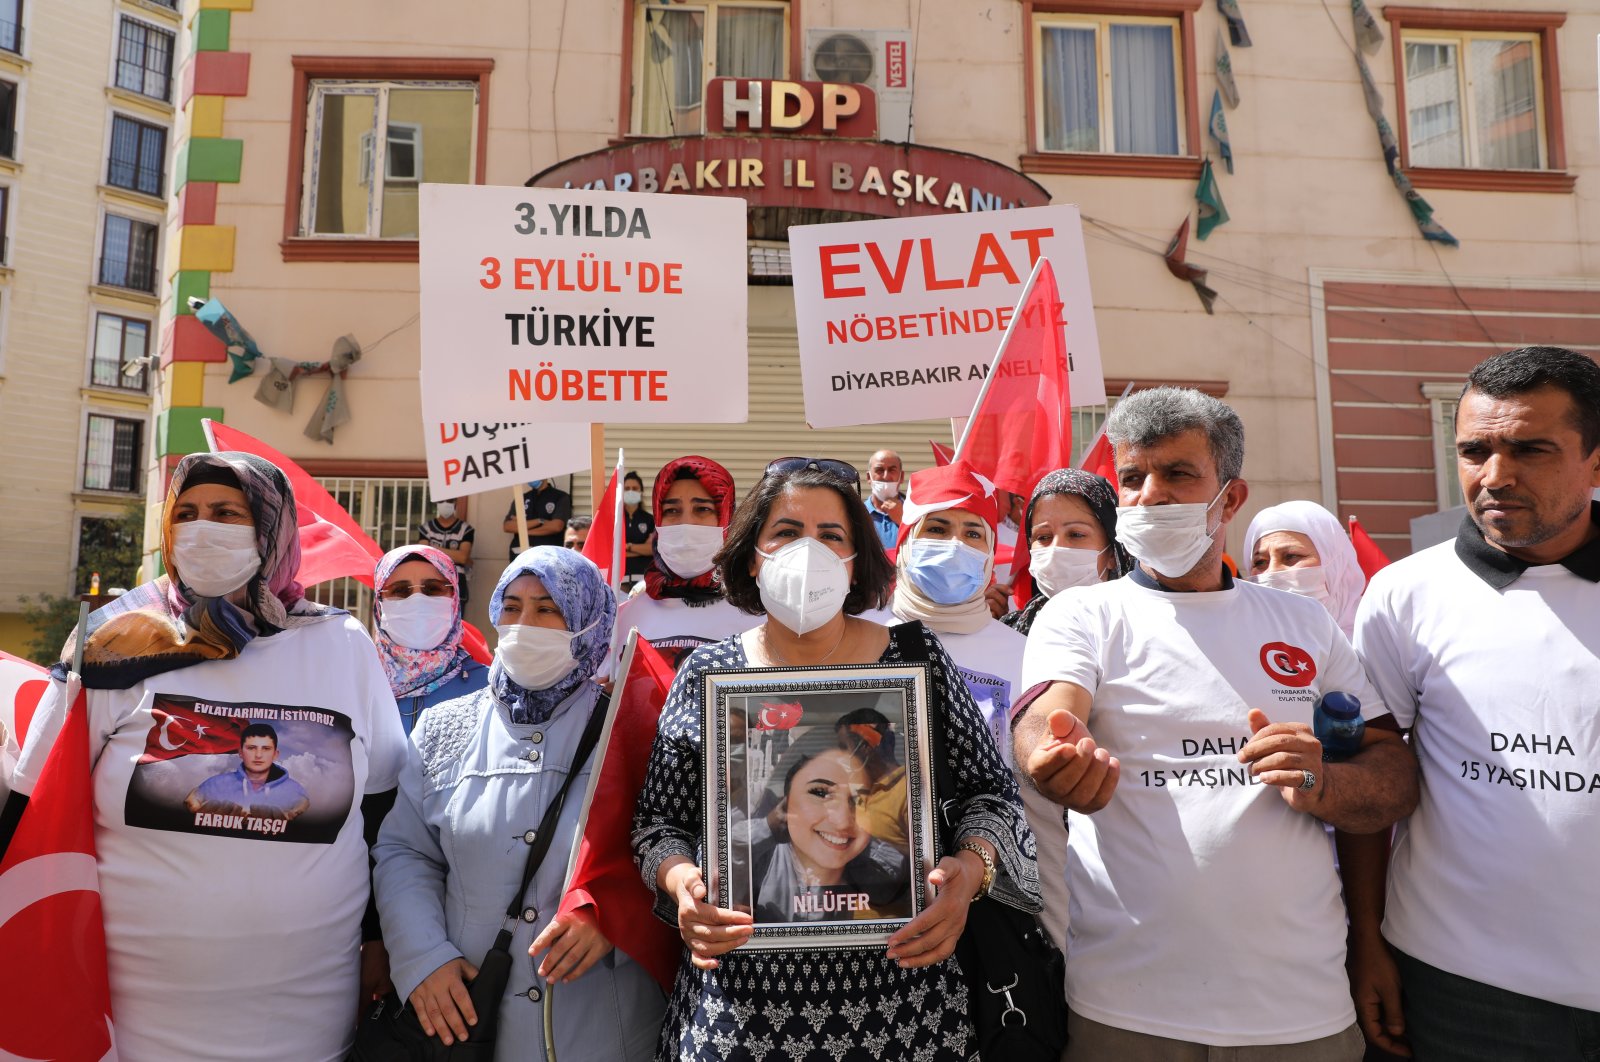 Maide Türemiş (C) holds a picture of her daughter, Nilüfer, in front of the HDP headquarters during her visit to protesting parents, Diyarbakır, Turkey, Sept. 1, 2021. (AA Photo)